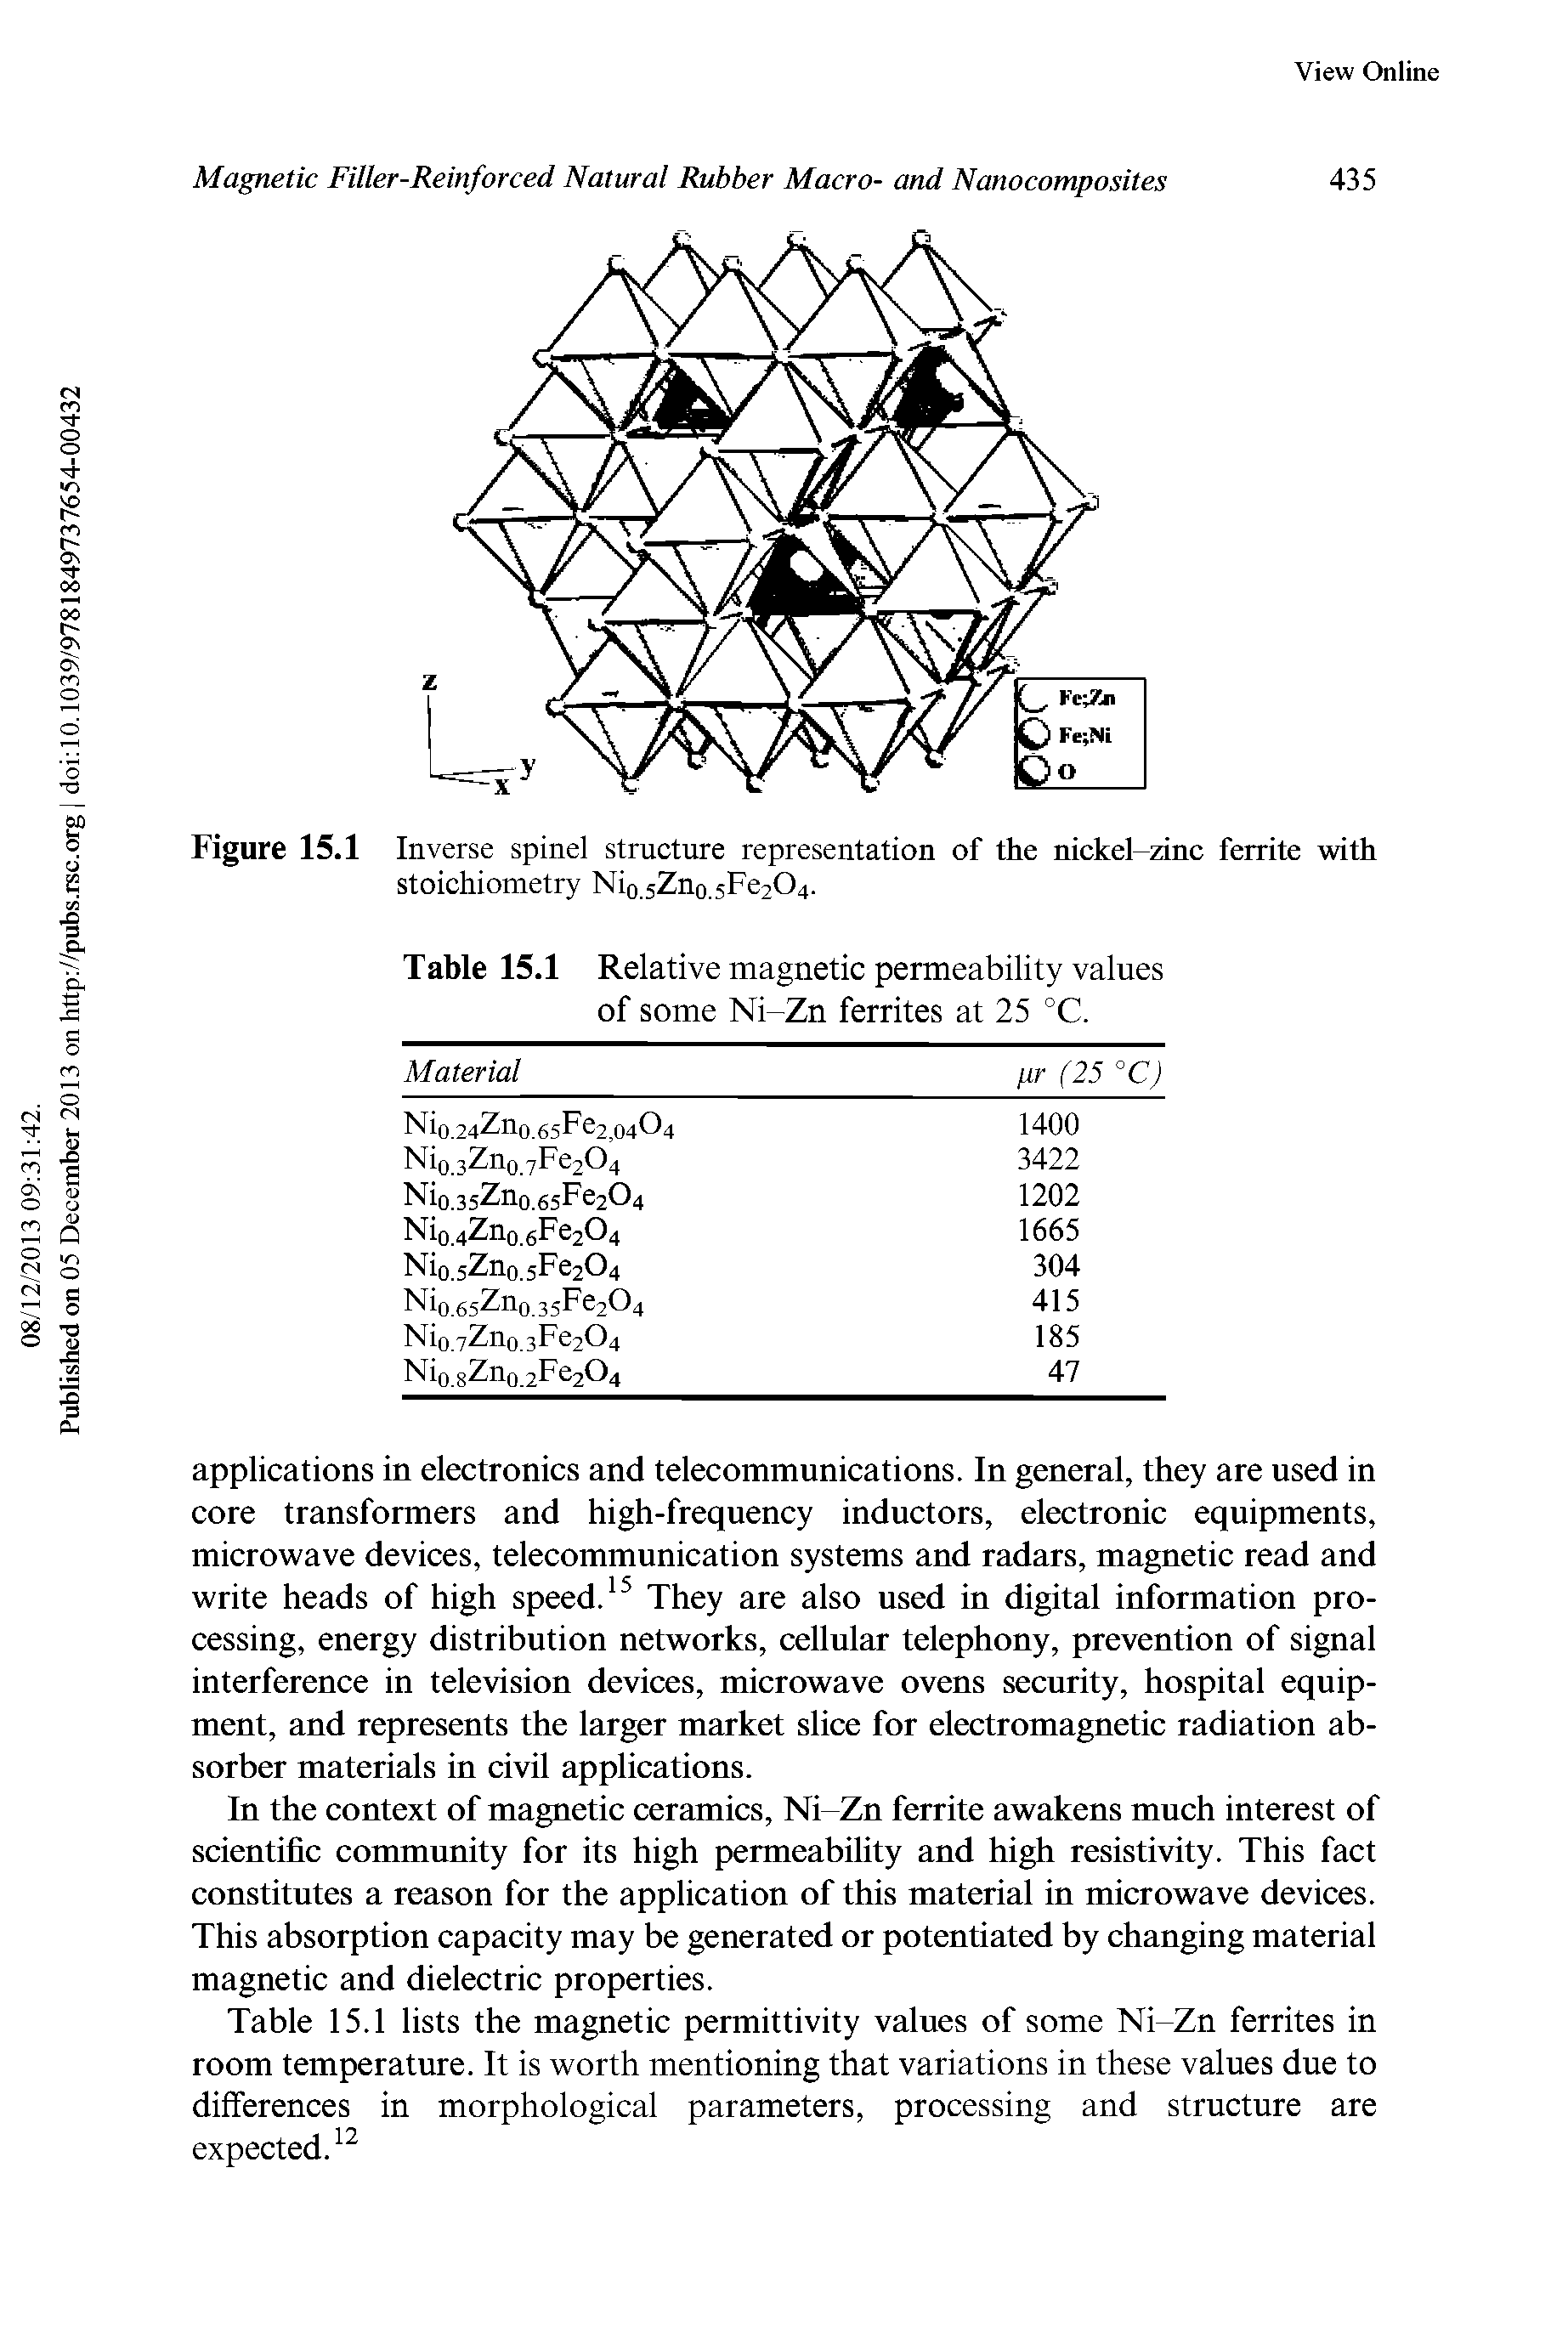 Table 15.1 Relative magnetic permeability values of some Ni-Zn ferrites at 25 °C.